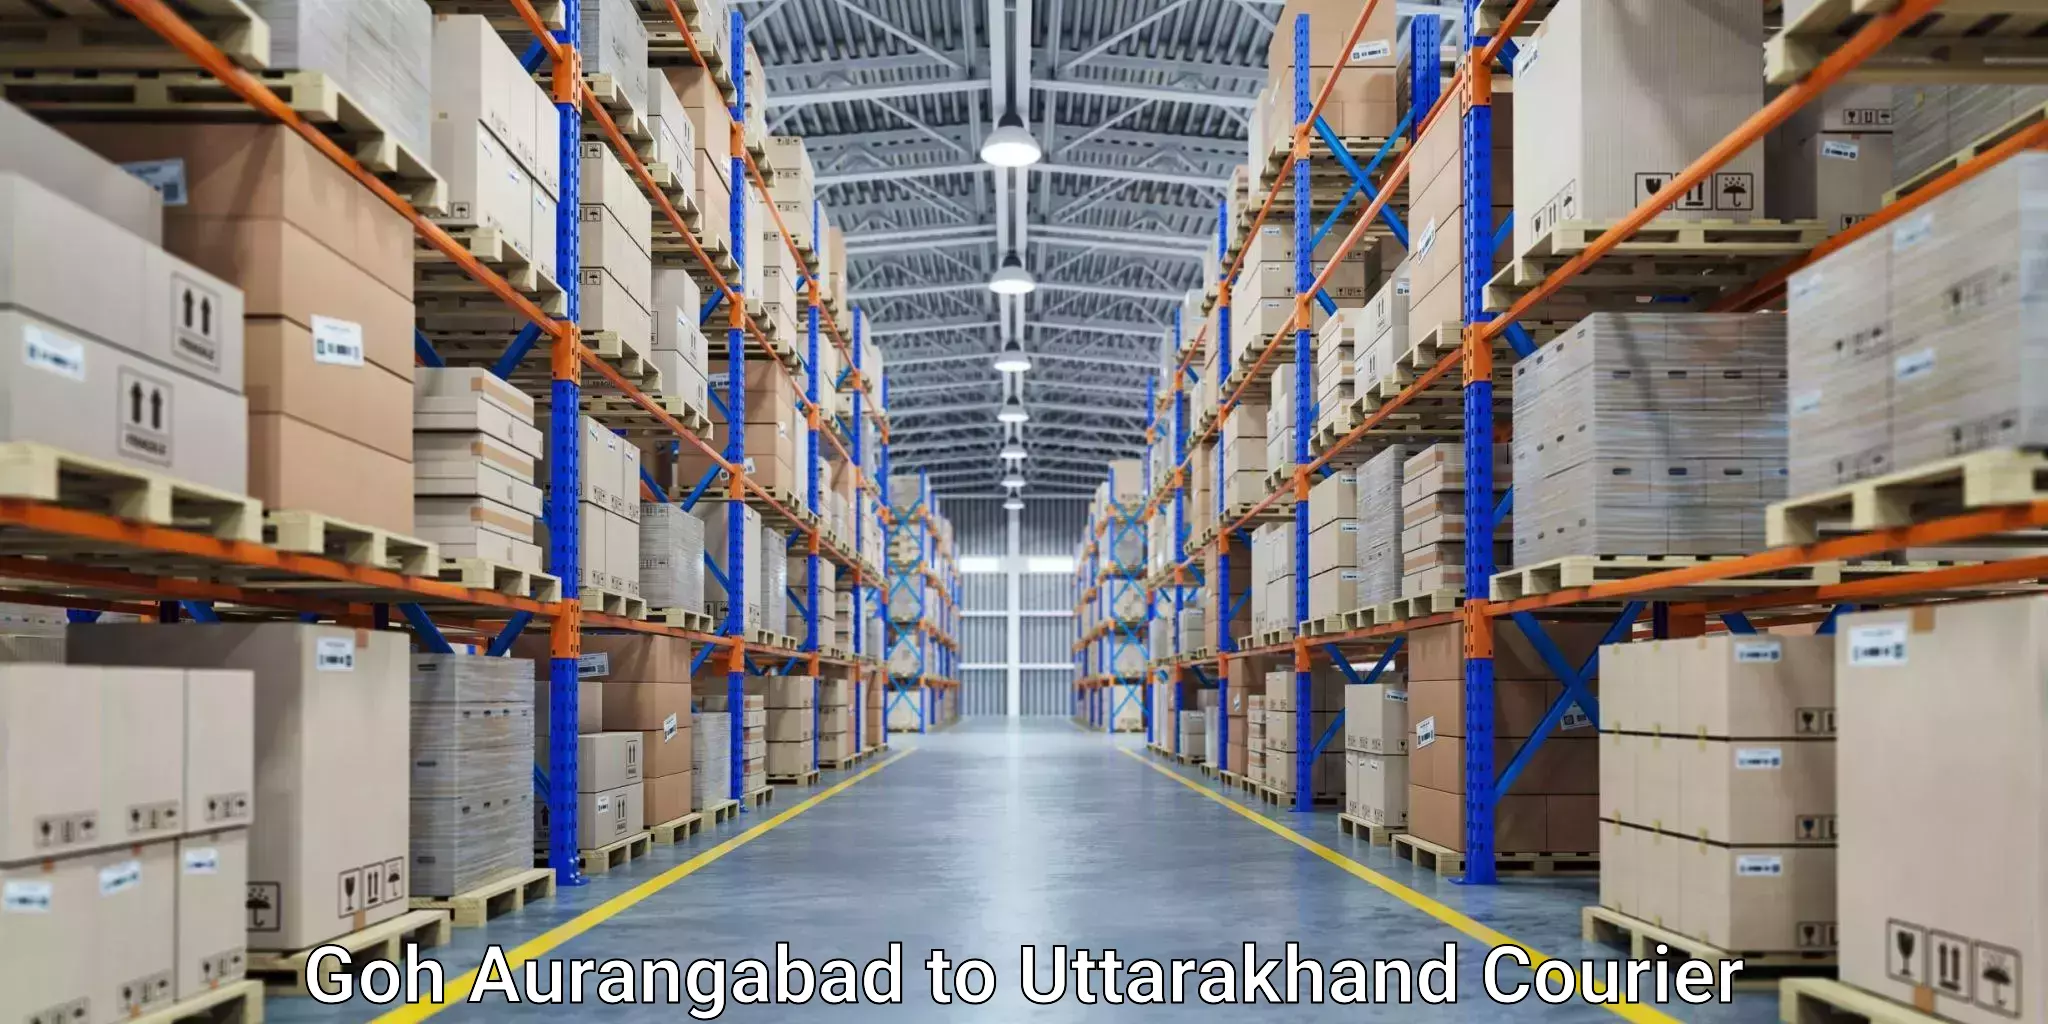 Integrated shipping systems Goh Aurangabad to Tanakpur